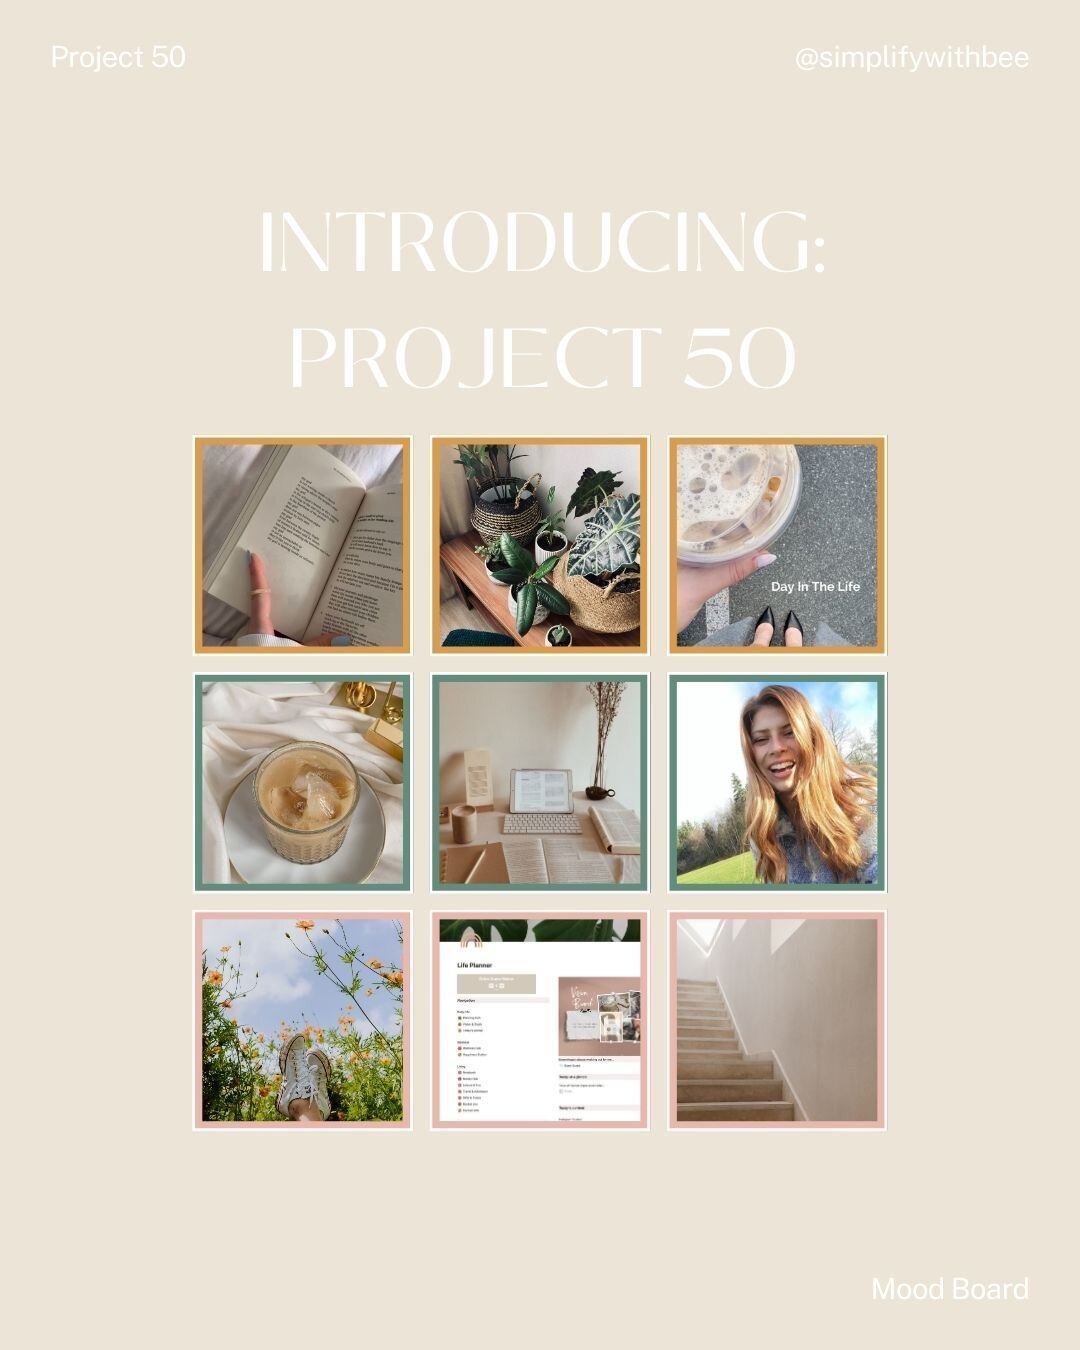 let&rsquo;s make change happen 🤍 I'm calling this project: Main Character 
 
- what is project 50? 
the idea is to commit to a set of healthy habits for 50 days to help make positive changes in your life. 
 
- what are the rules? 
swipe for the 7 ba